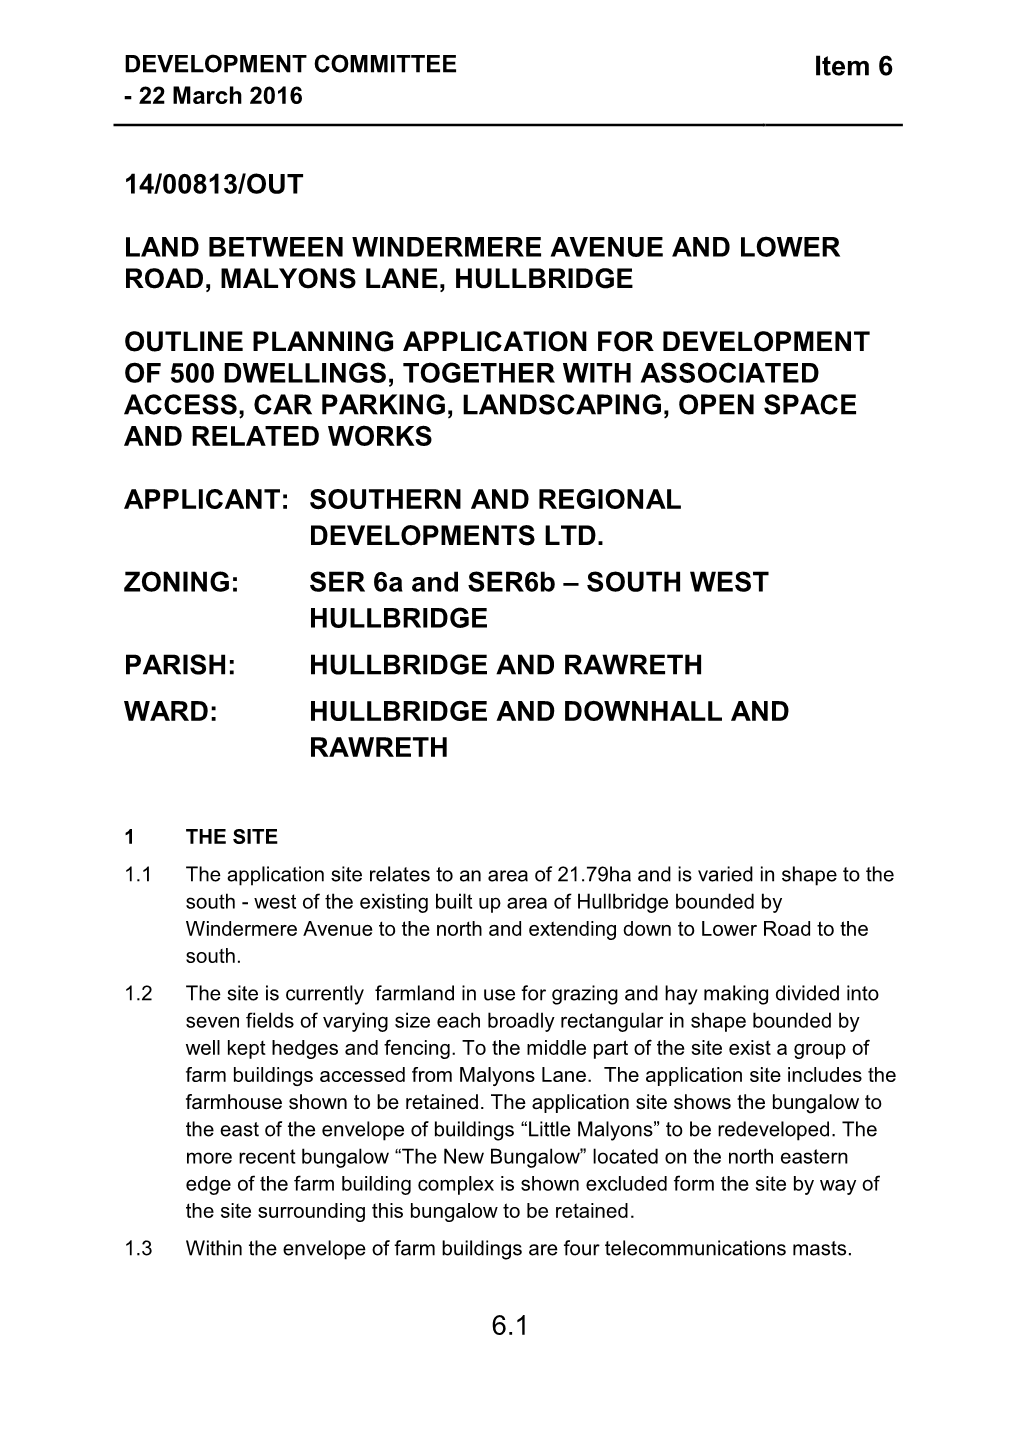 Item 6 6.1 14/00813/OUT LAND BETWEEN WINDERMERE AVENUE and LOWER ROAD, MALYONS LANE, HULLBRIDGE OUTLINE PLANNING APPLICATION FO